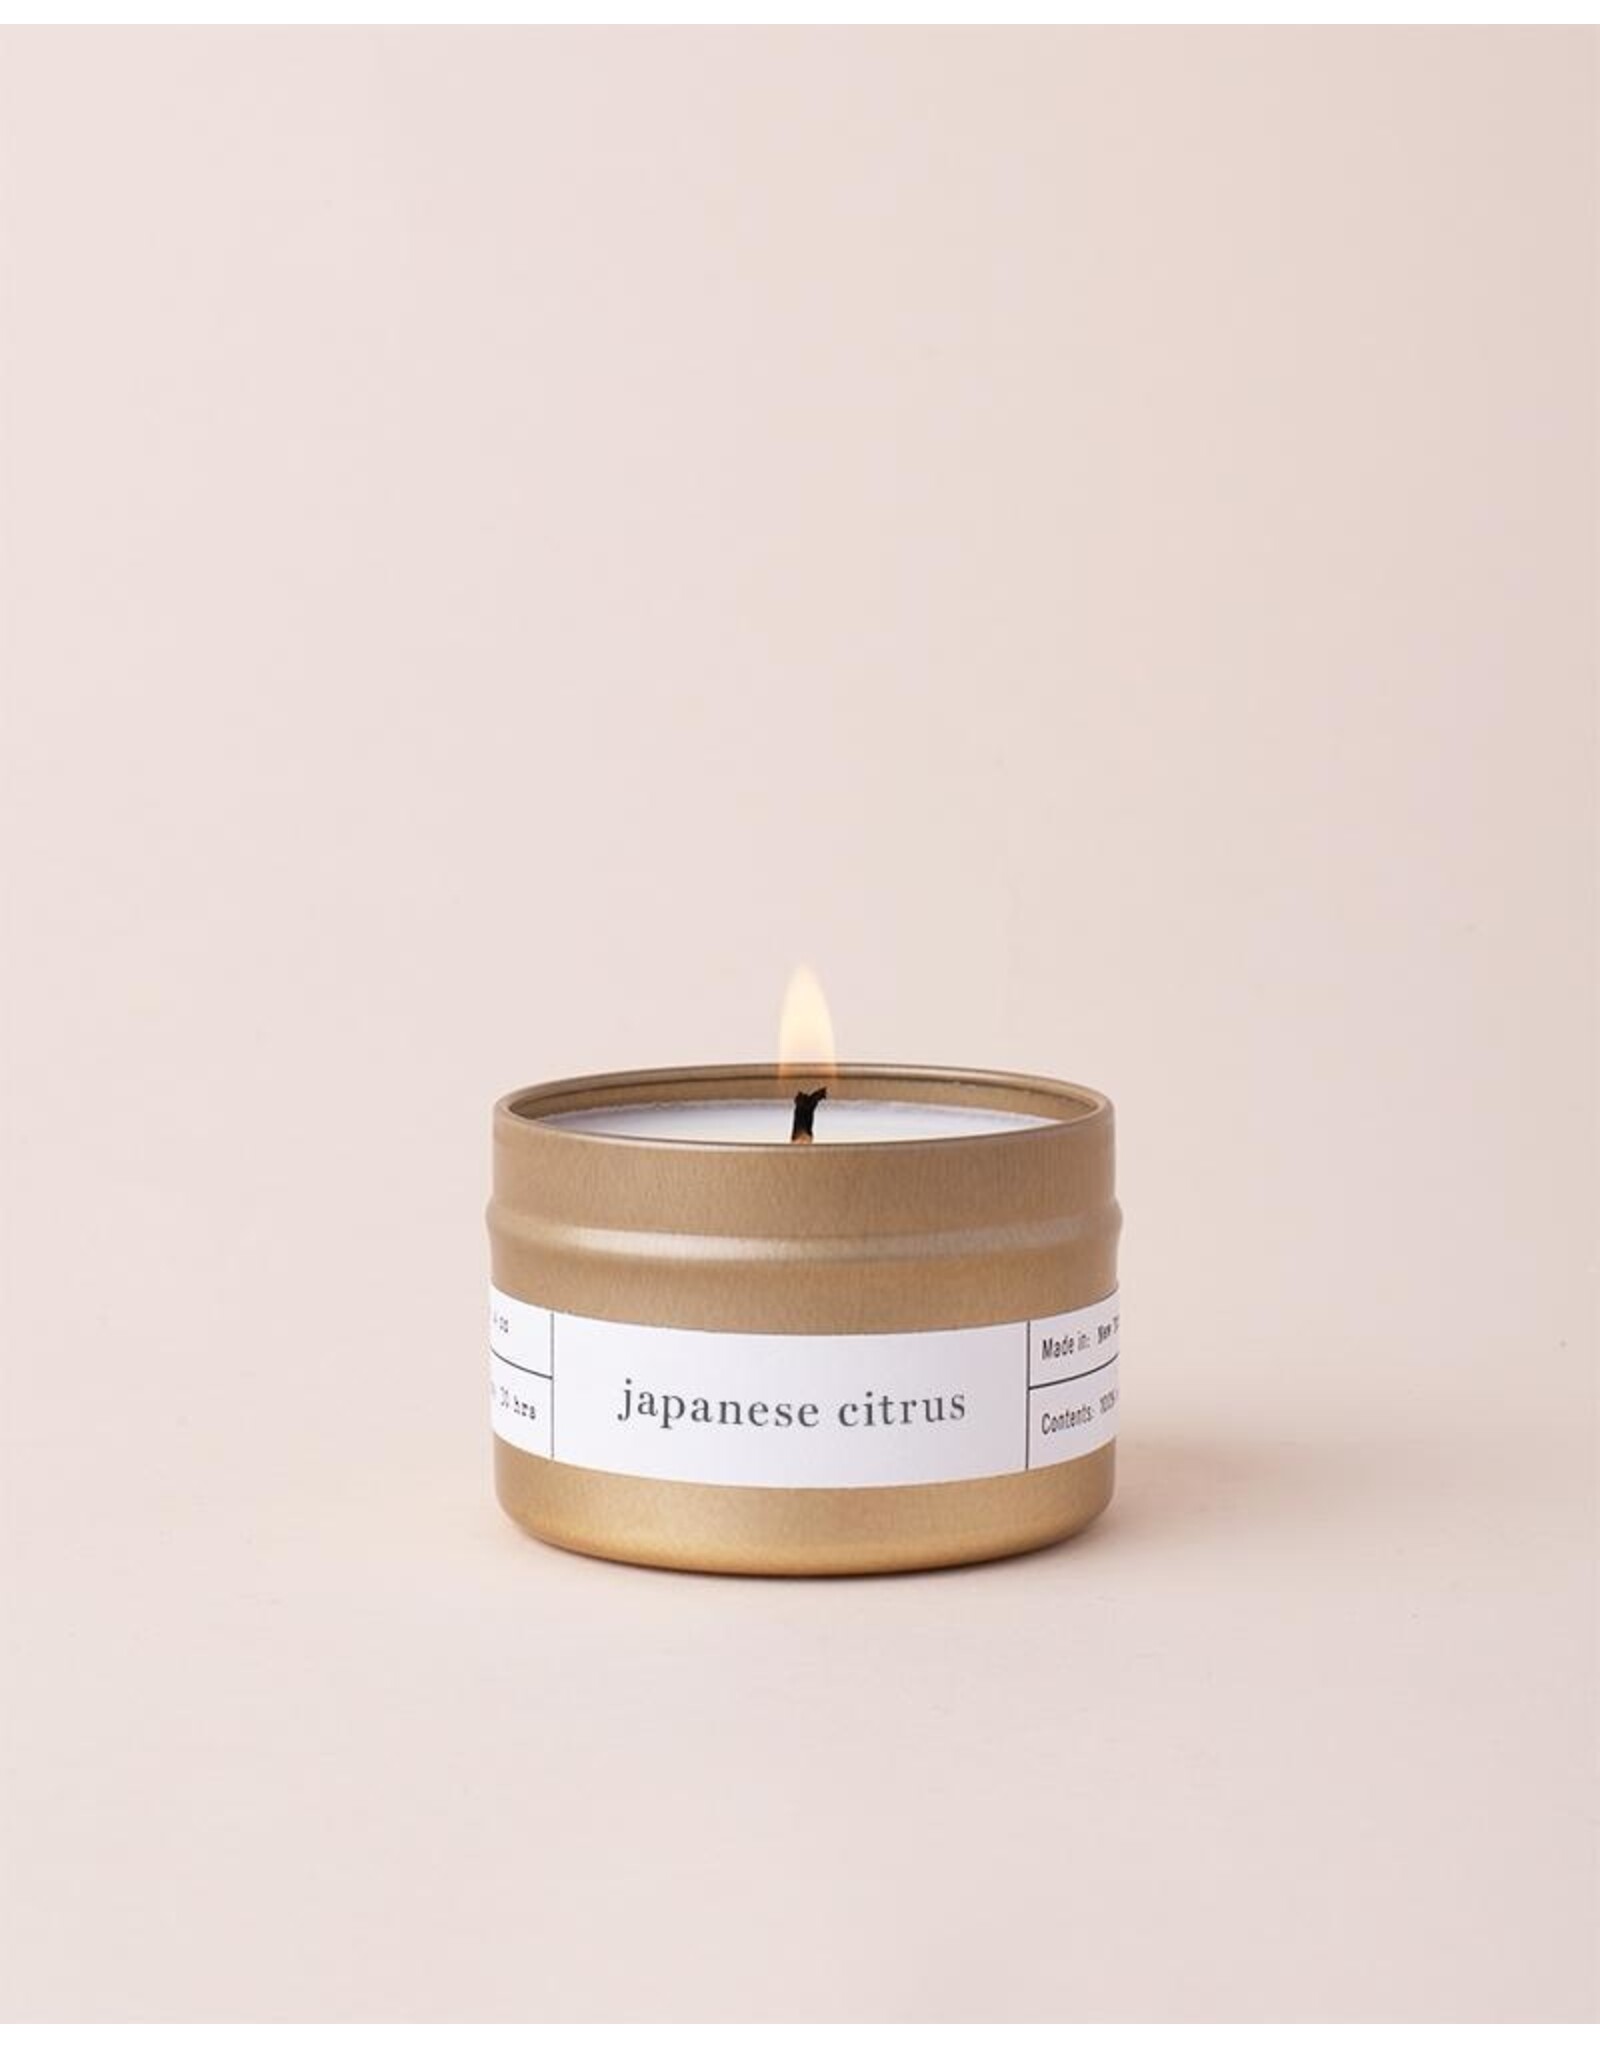 Brooklyn Candle Studio Japanese Citrus Gold Travel Candle